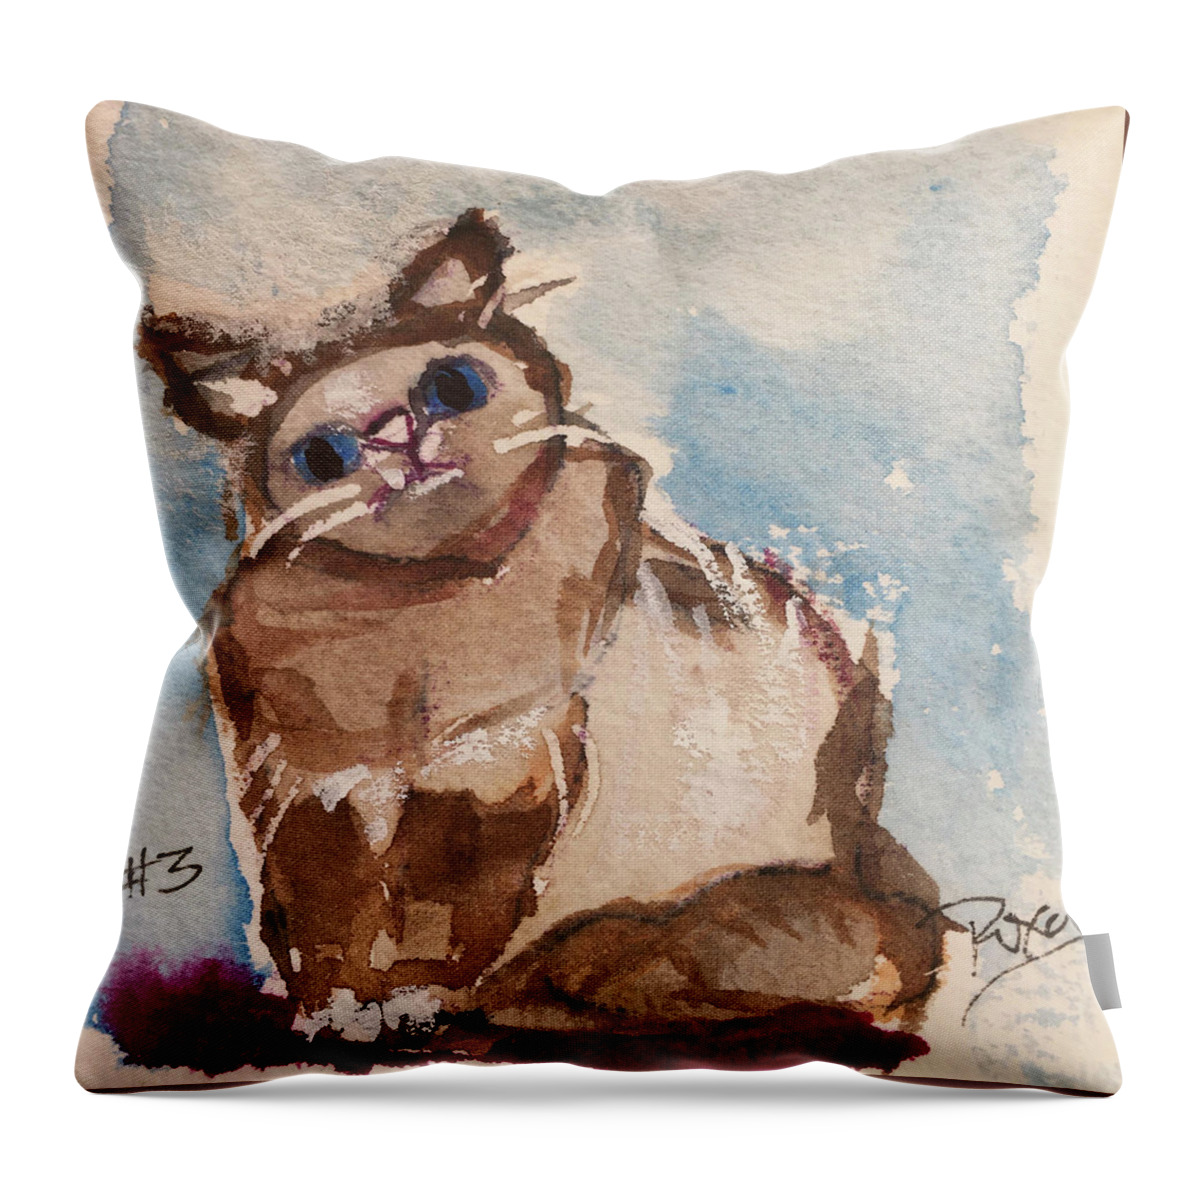 Whimsy Throw Pillow featuring the painting Whimsy Kitty 3 by Roxy Rich